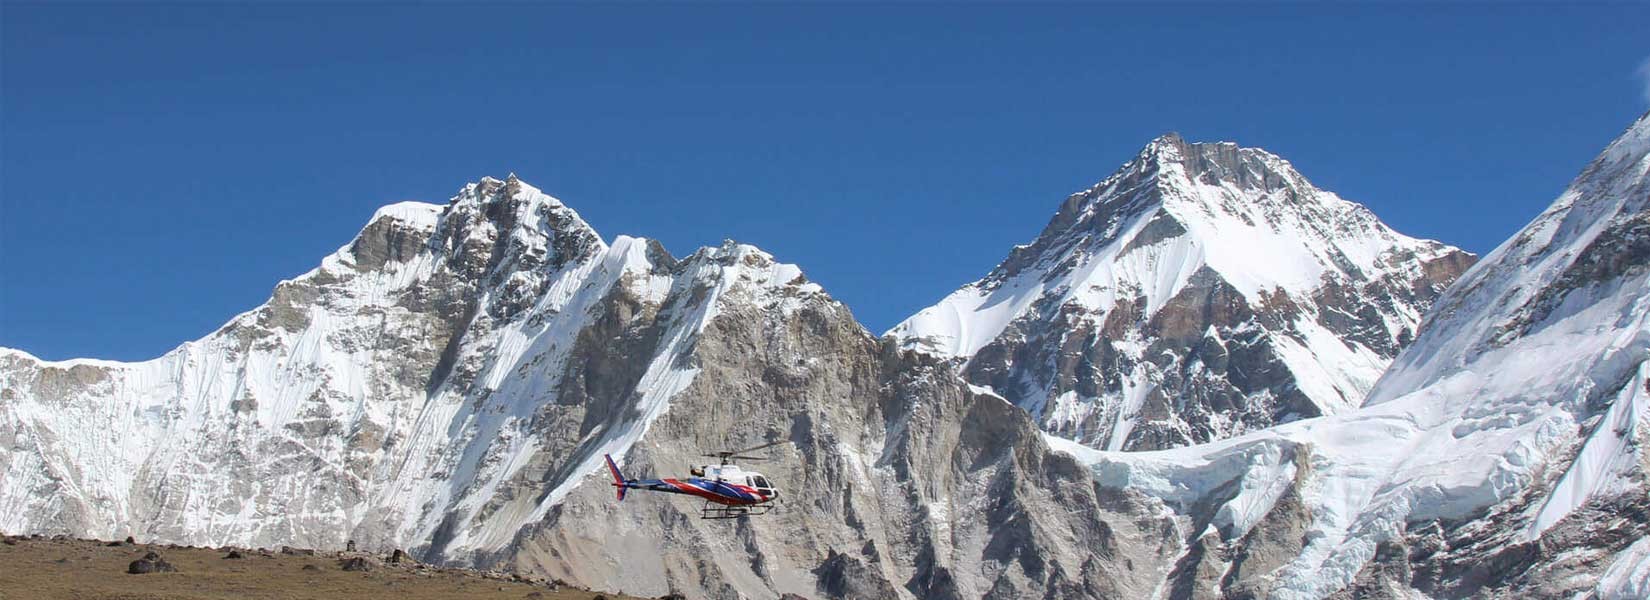 Mt.Everest helicopter tour